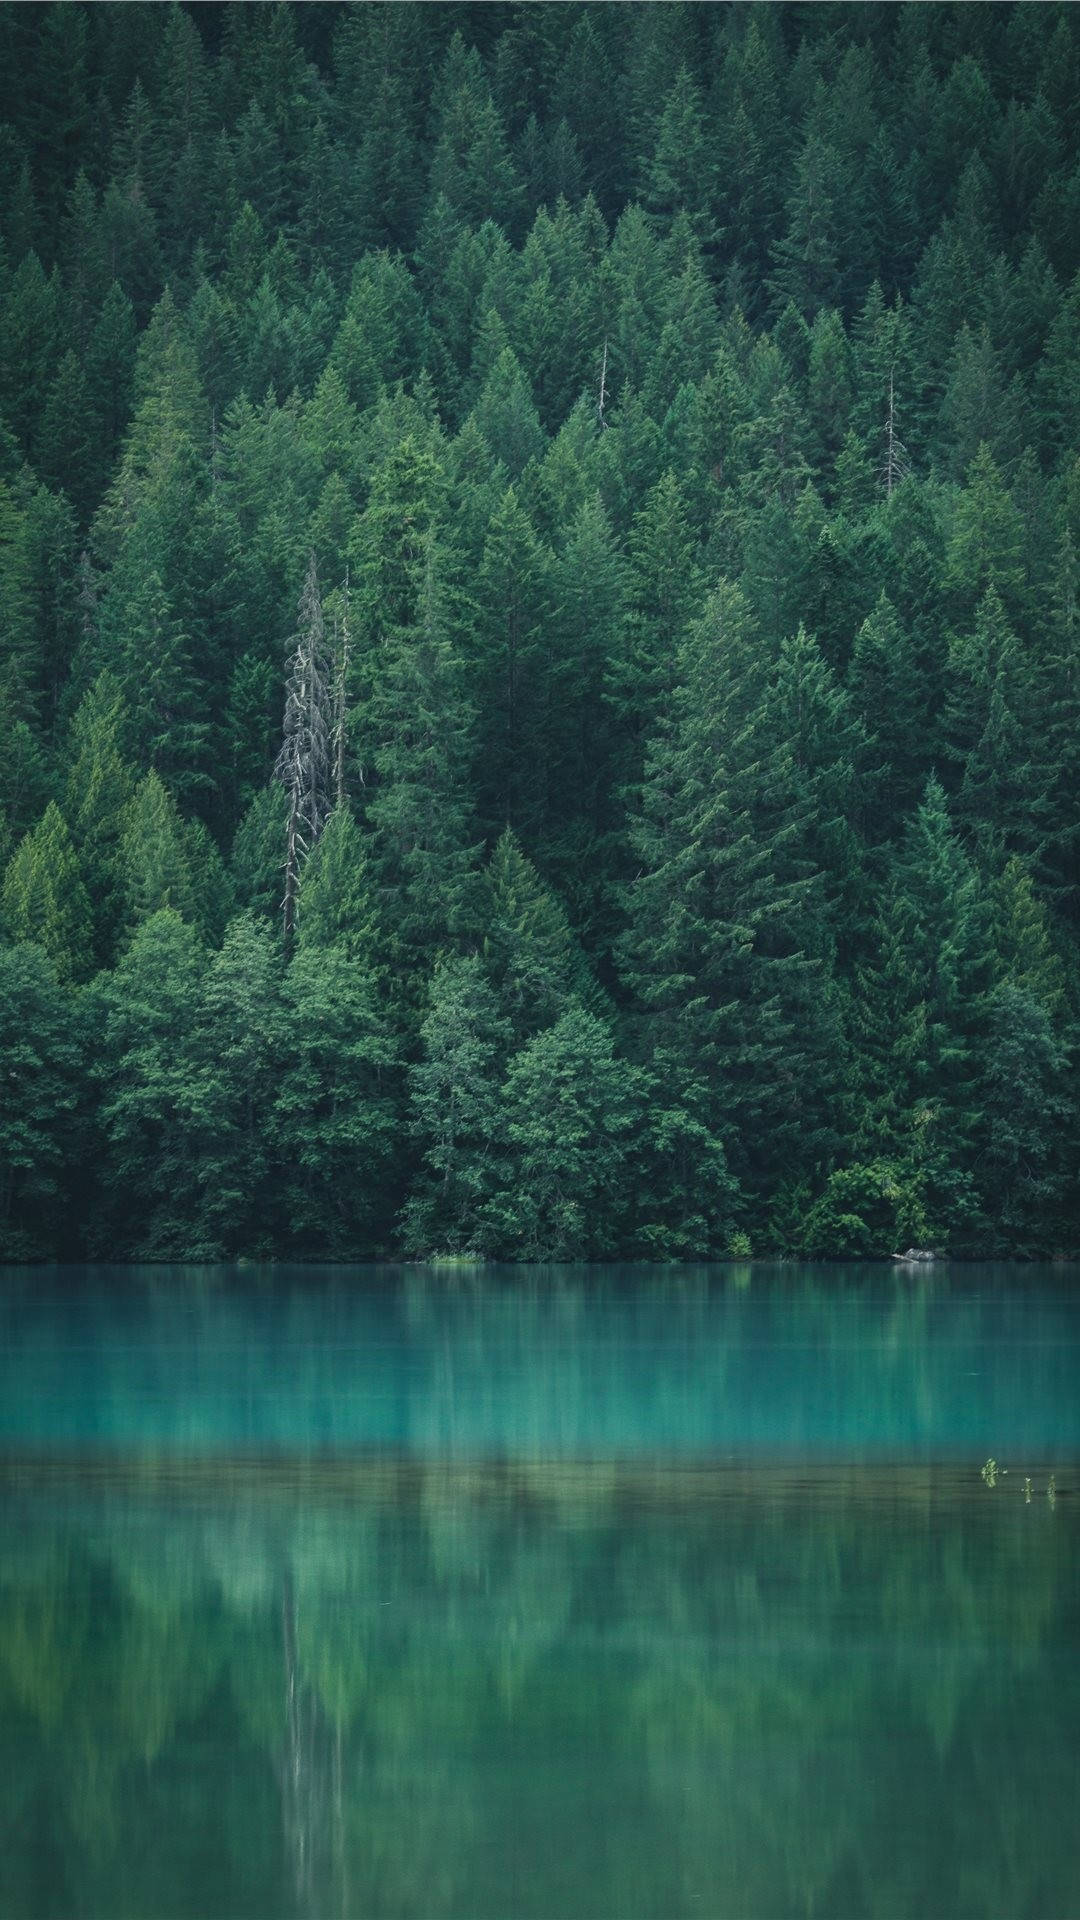 Forest Iphone wallpaper for desktop and mobile phone